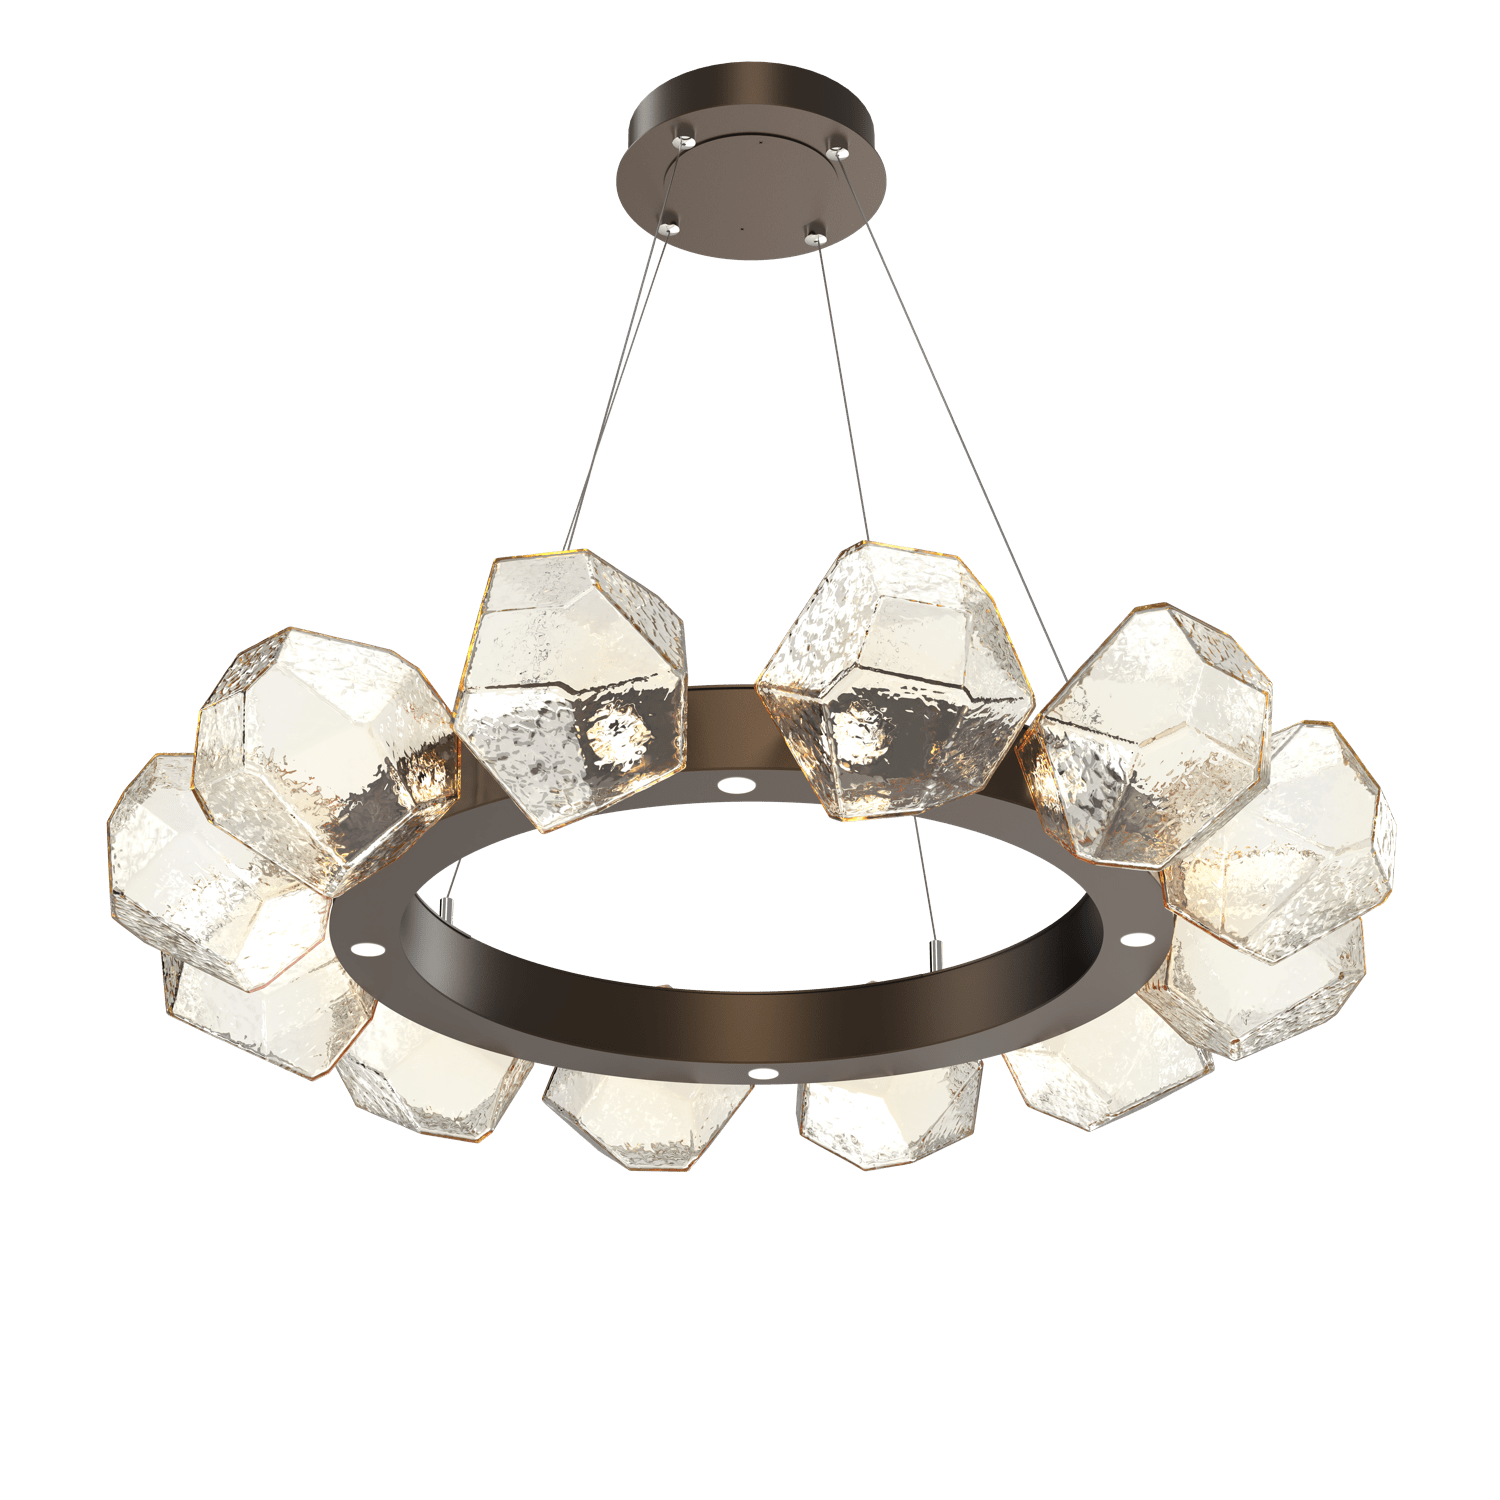 CHB0039-36-FB-A-Hammerton-Studio-Gem-36-inch-radial-ring-chandelier-with-flat-bronze-finish-and-amber-blown-glass-shades-and-LED-lamping